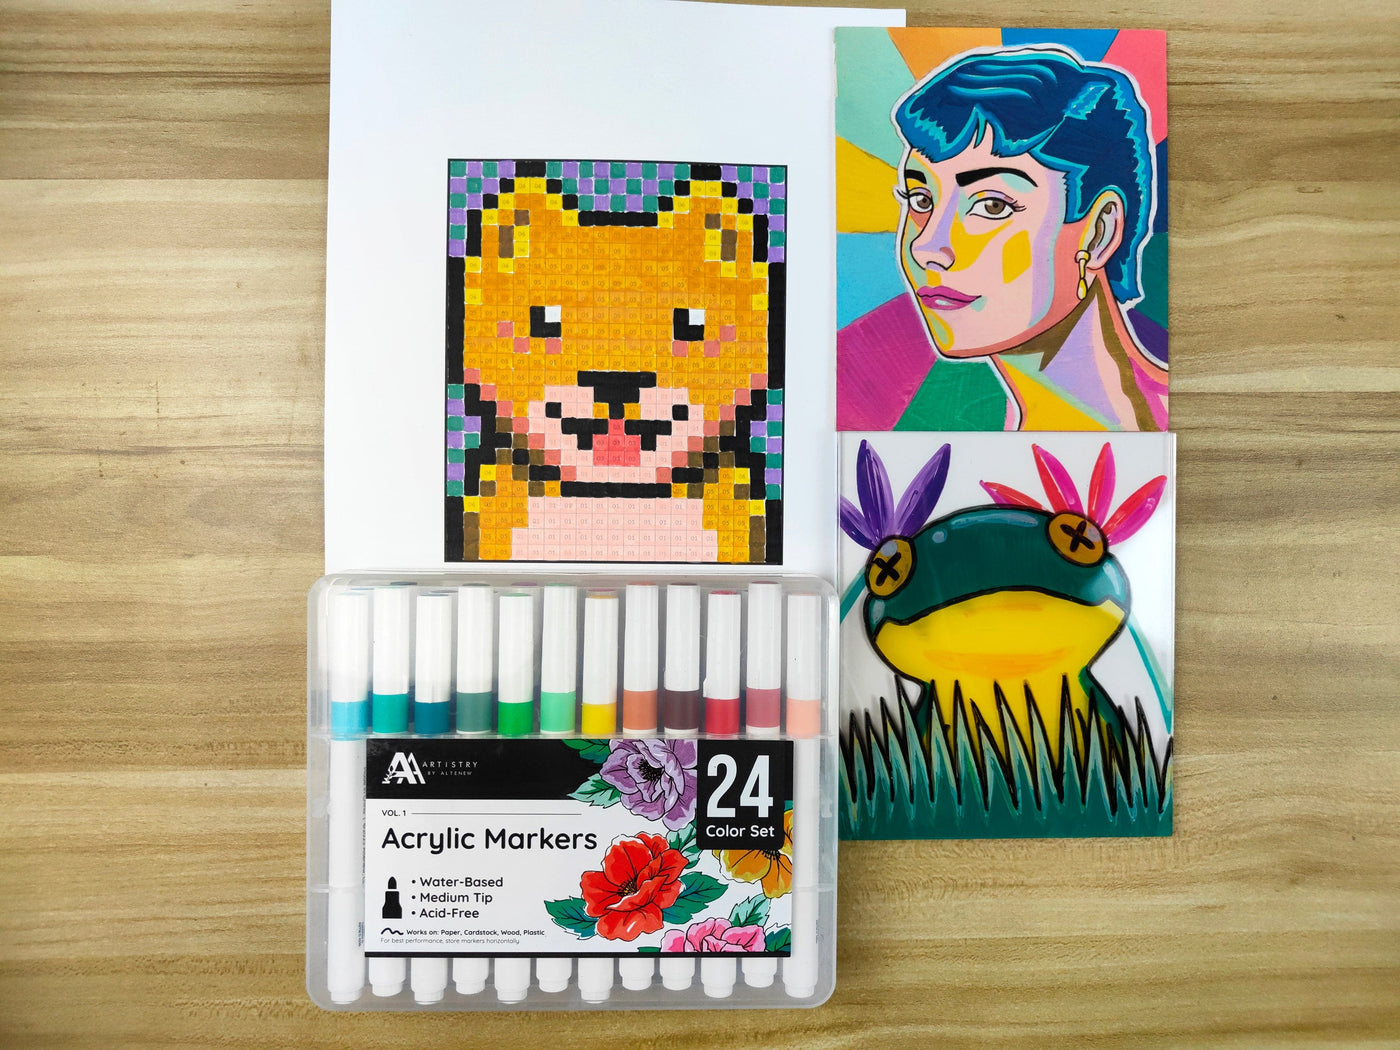 Class The Artist in You: Acrylic Markers 101